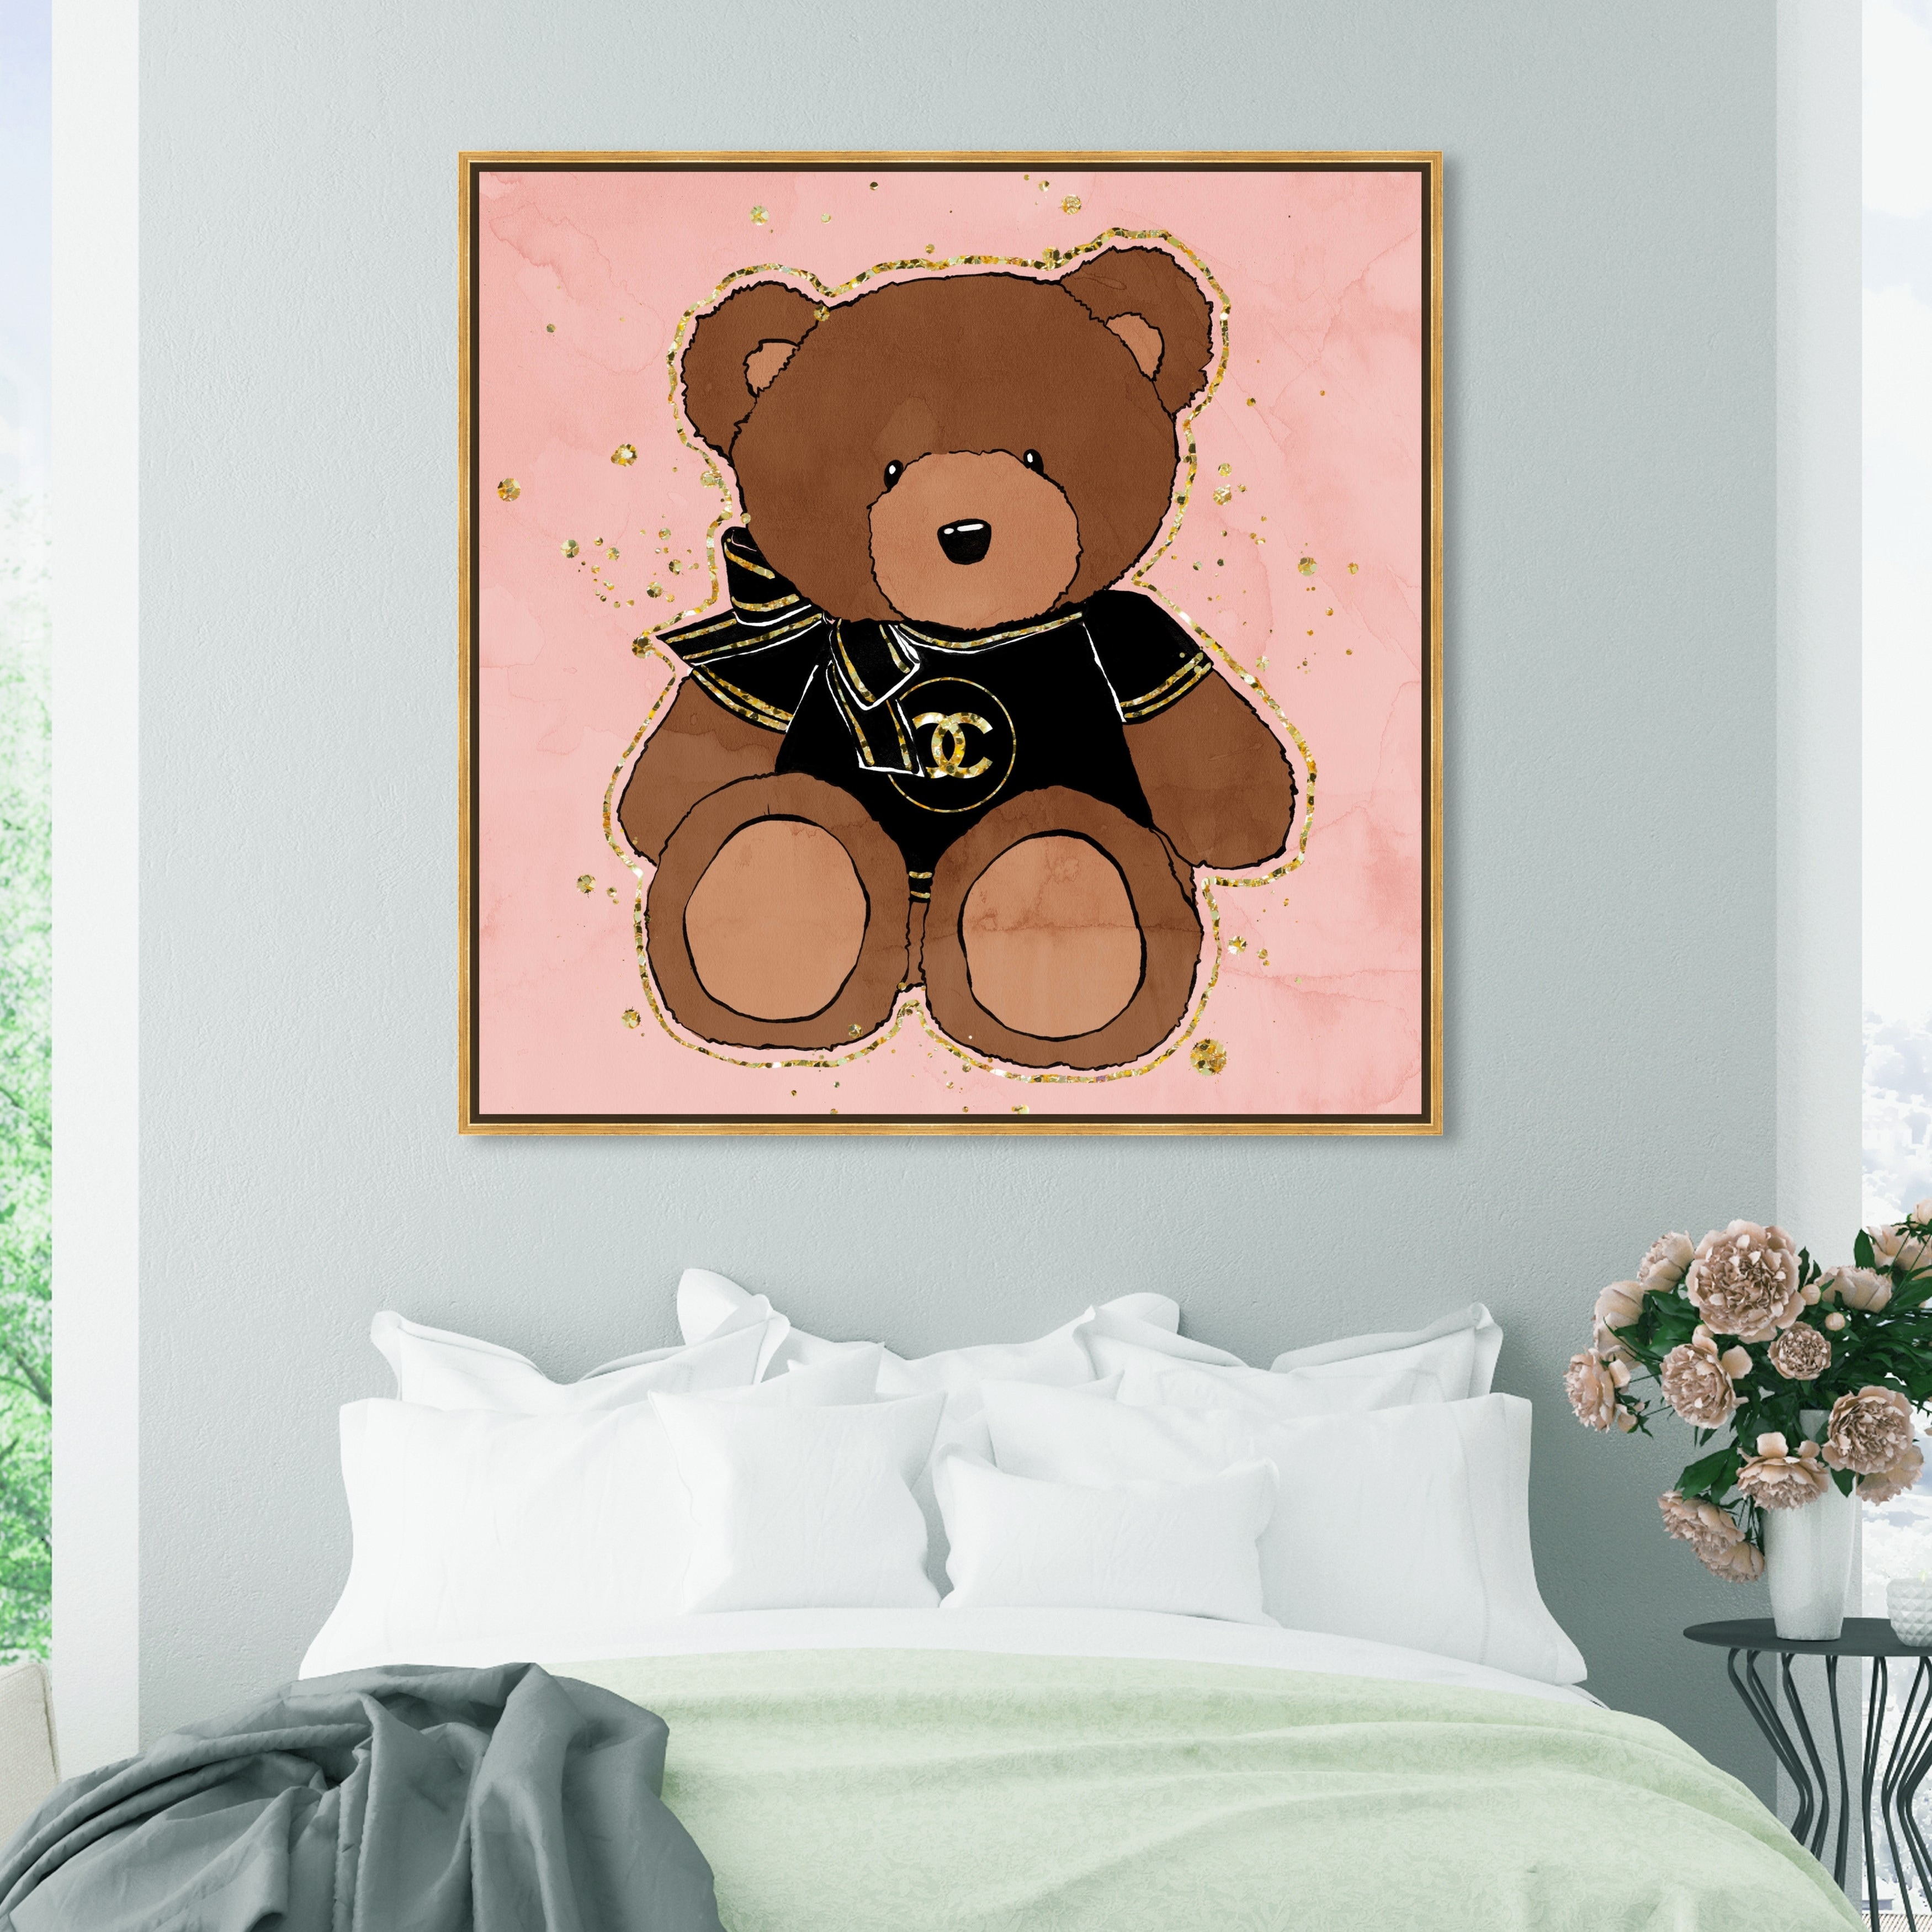 https://ak1.ostkcdn.com/images/products/is/images/direct/8319ba9ed47a5df29498e3132d975876dfb5b0cc/Oliver-Gal-%27First-Glam-Teddy-Bear%27-Fashion-and-Glam-Wall-Art-Framed-Canvas-Print-Lifestyle---Brown%2C-Pink.jpg